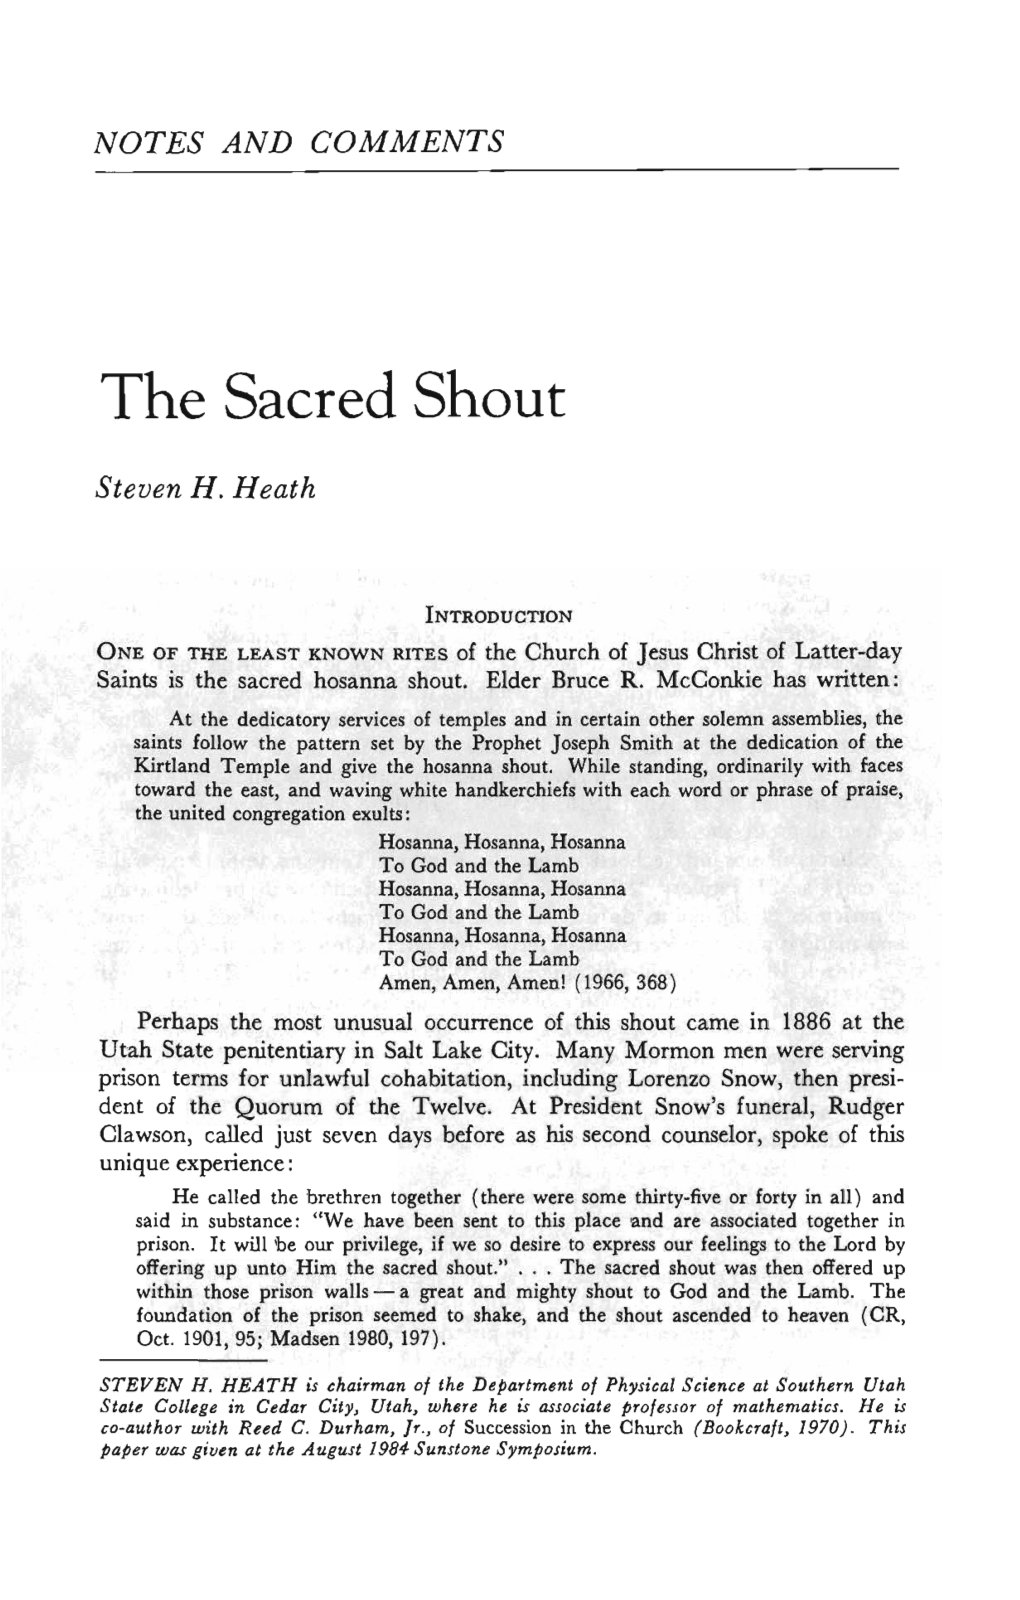 The Sacred Shout